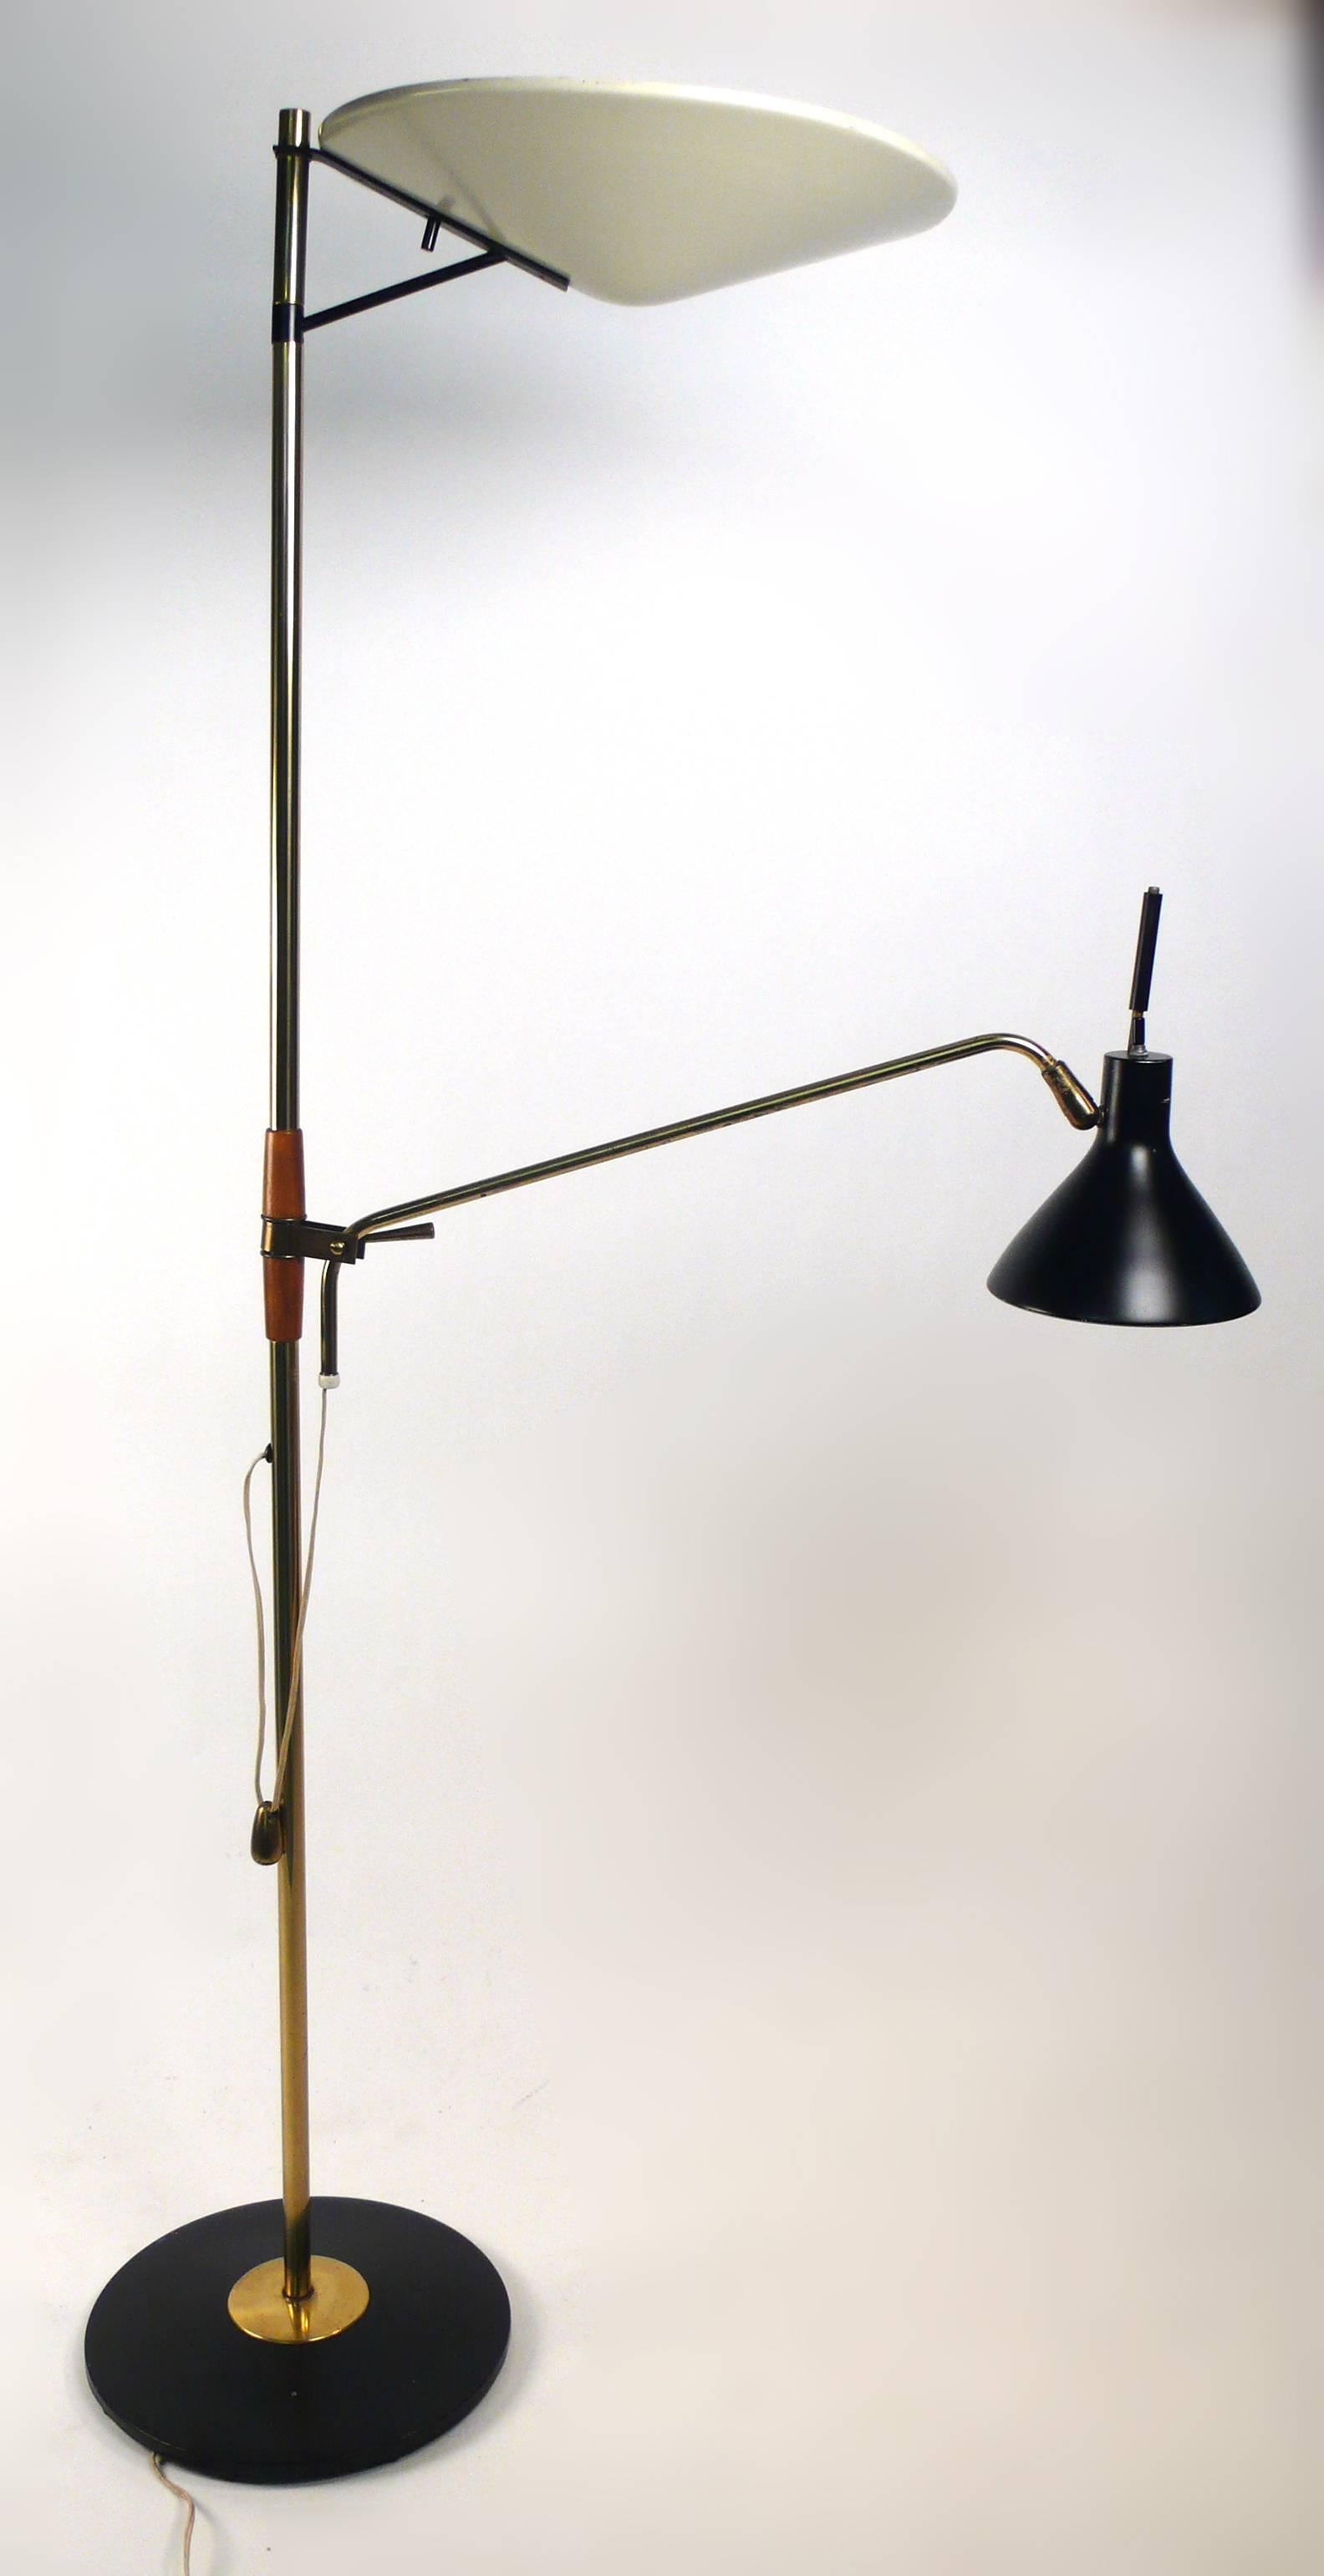 Floor lamp designed by Gerald Thurston for Lightolier. Lamp has adjustable reading lamp, swiveling uplight and original brass counter weight. Base measures 11